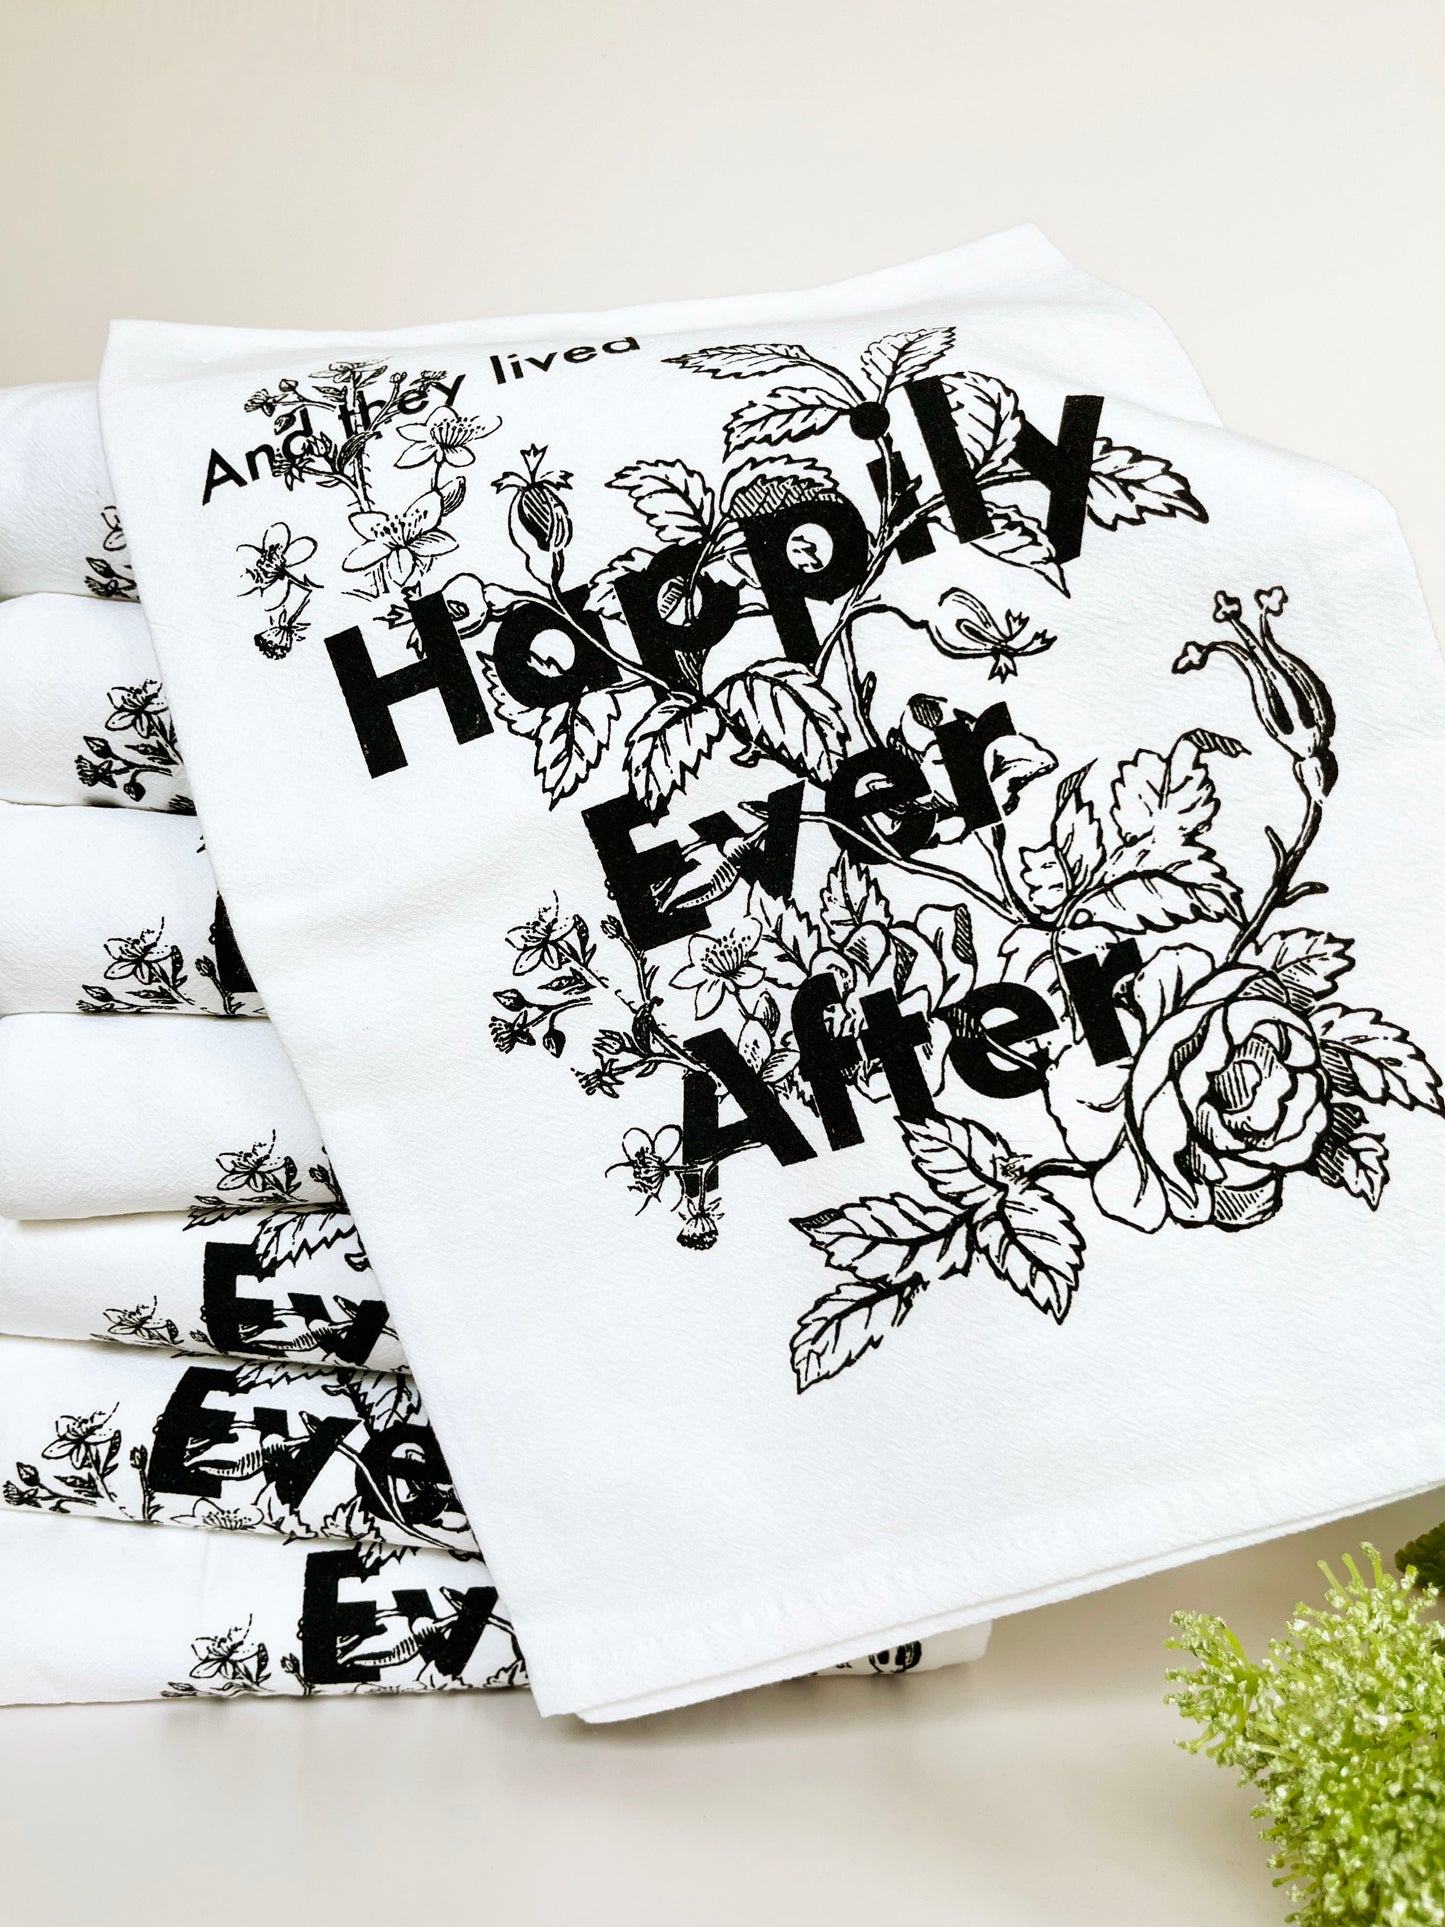 high quality cotton kitchen dish tea bar towel vintage floral design roses and they lived happily ever after housewarming engagement wedding shower gift marriage commitment black white screen print coin laundry  